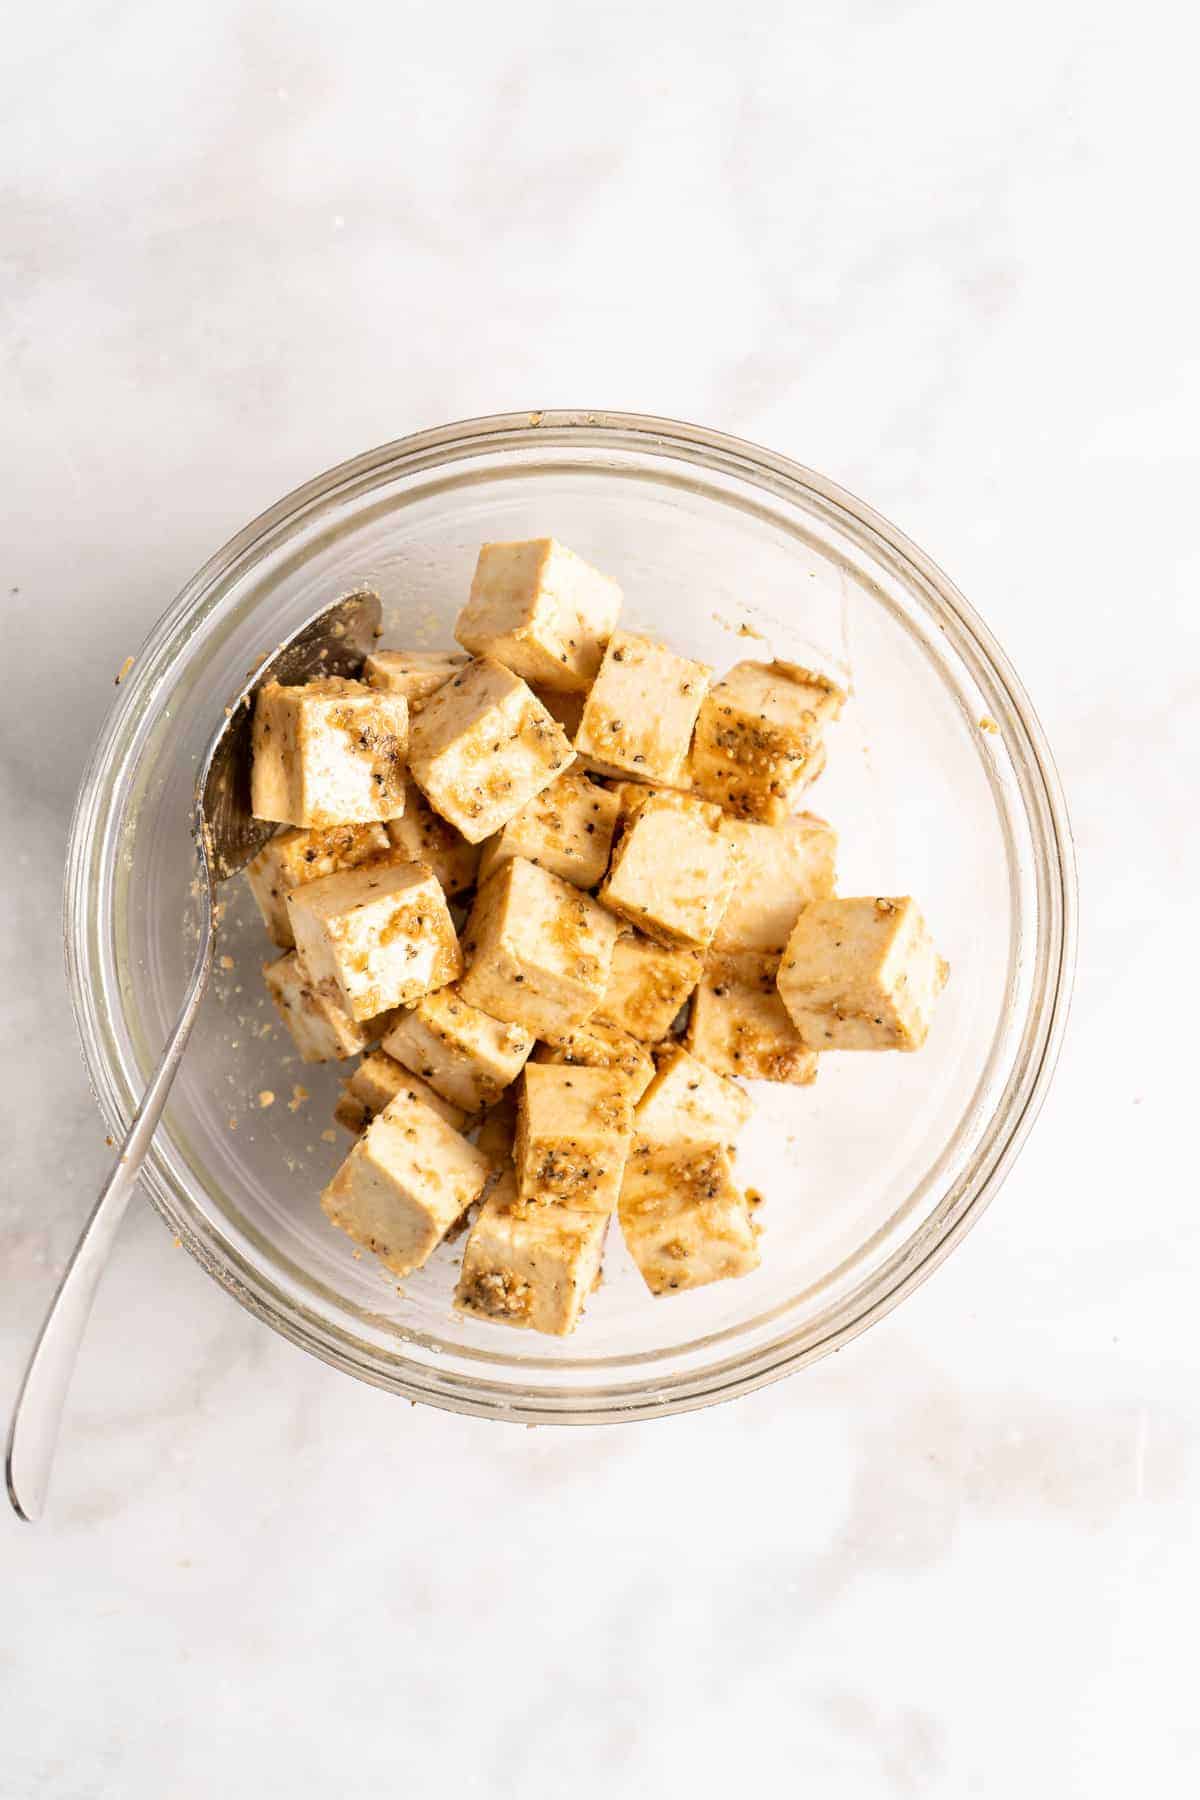 Overhead view of tofu in glass bowl with seasonings